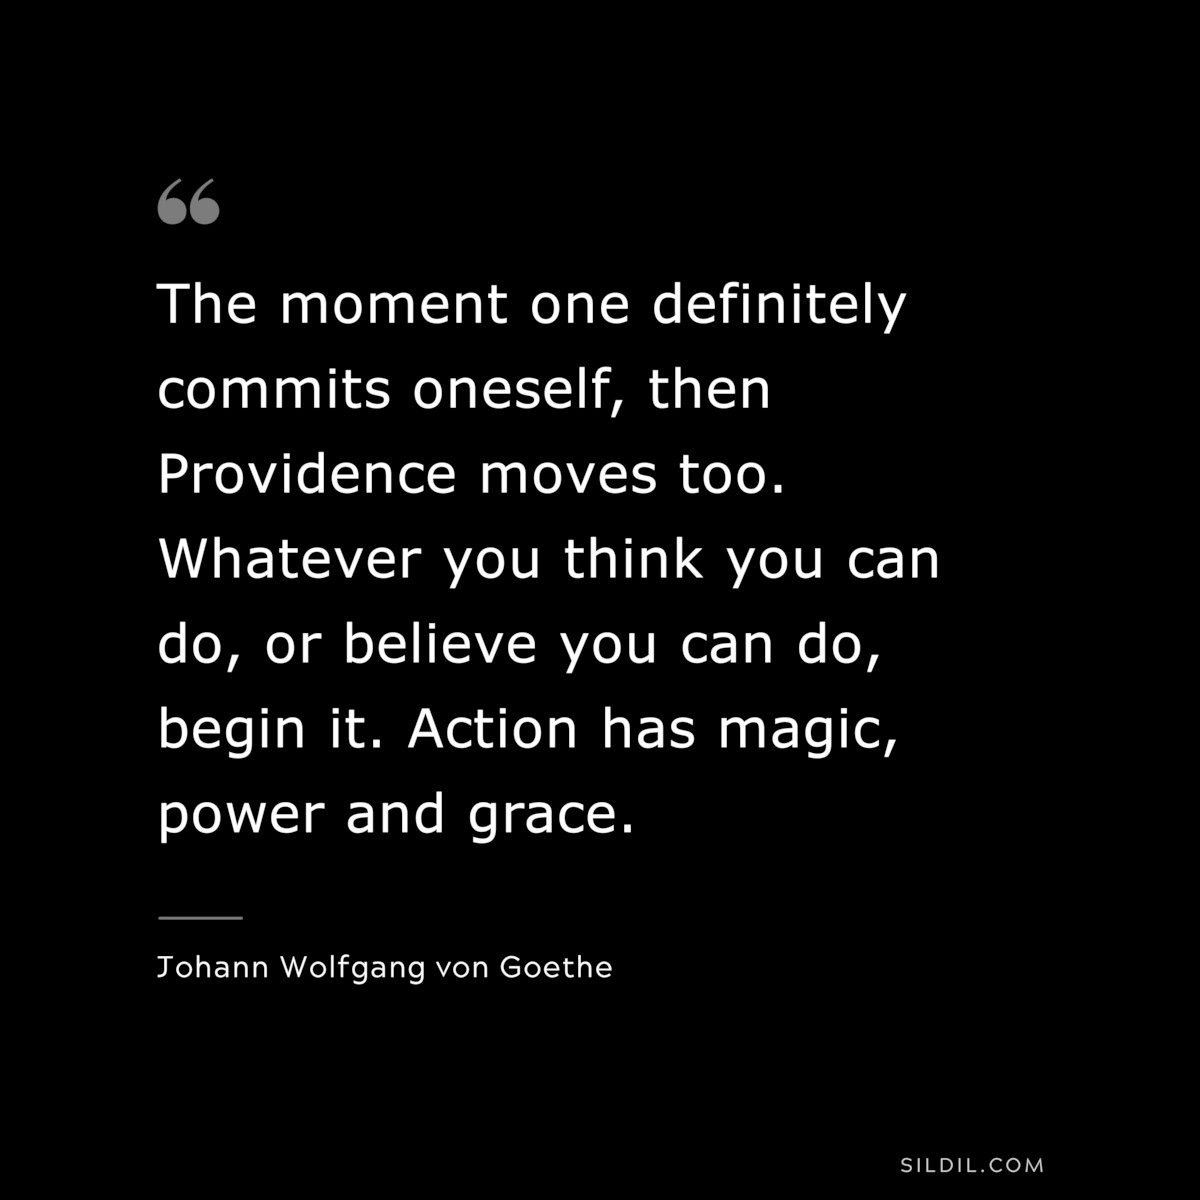 The moment one definitely commits oneself, then Providence moves too. Whatever you think you can do, or believe you can do, begin it. Action has magic, power and grace.― Johann Wolfgang von Goethe